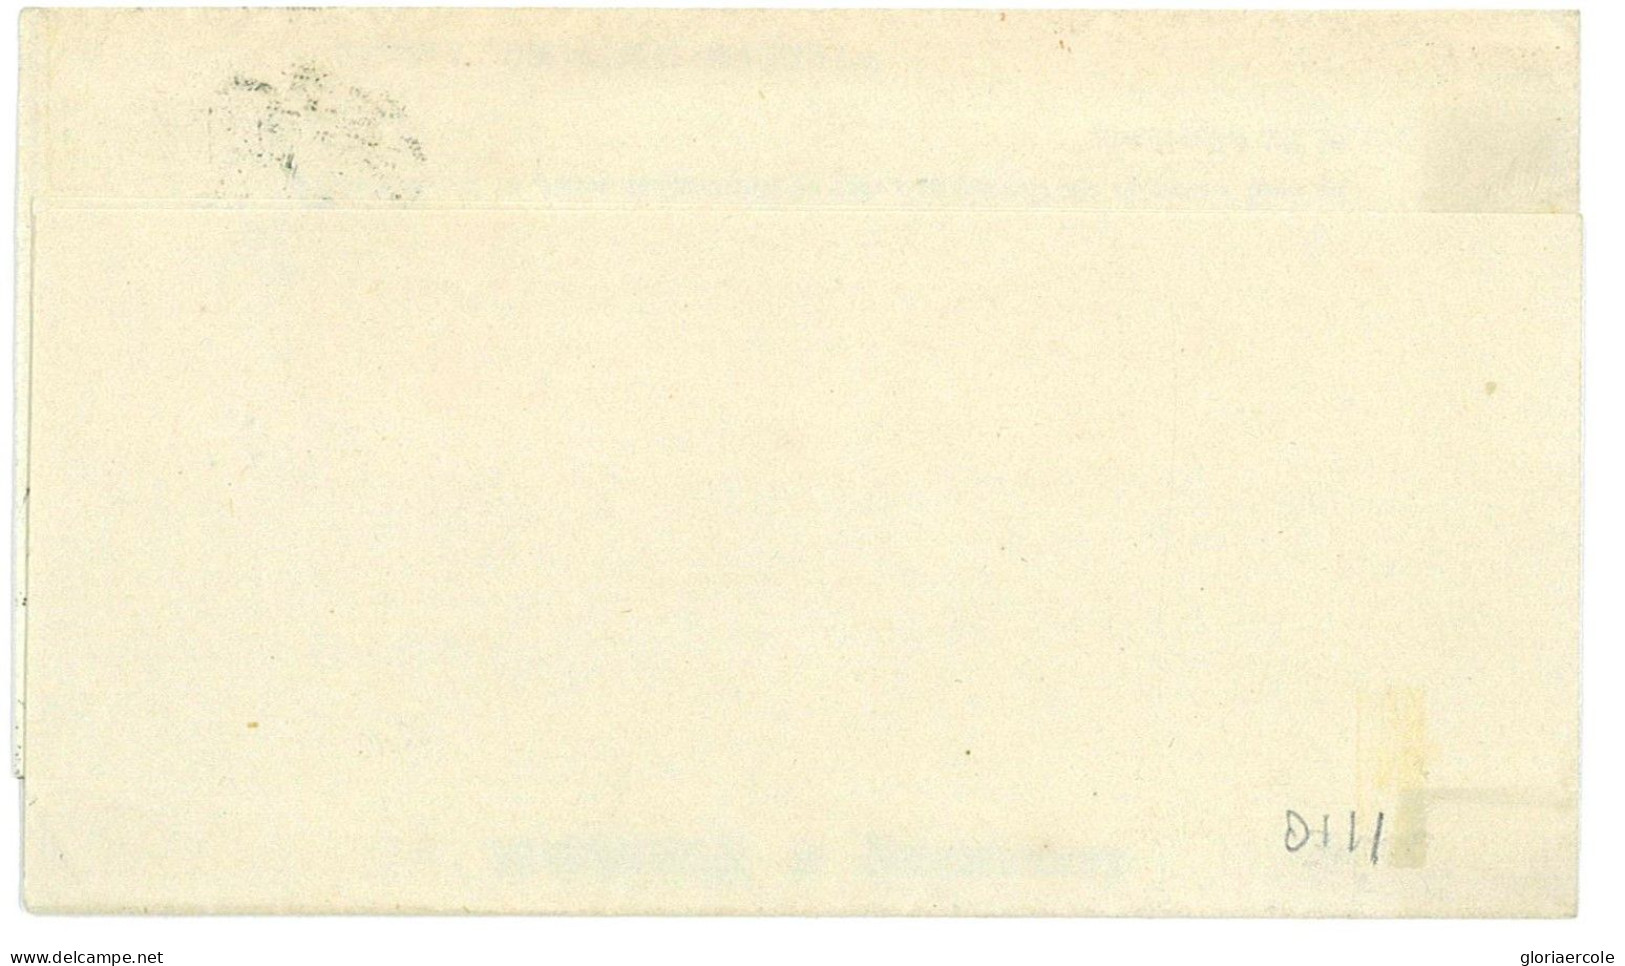 P2897 - USA FRANKLIN 1 CT, ON PRINTED MATTER FOLDED LETTER FROM DEDHAM TO BOSTON SCOTT NR. 9 - Cartas & Documentos